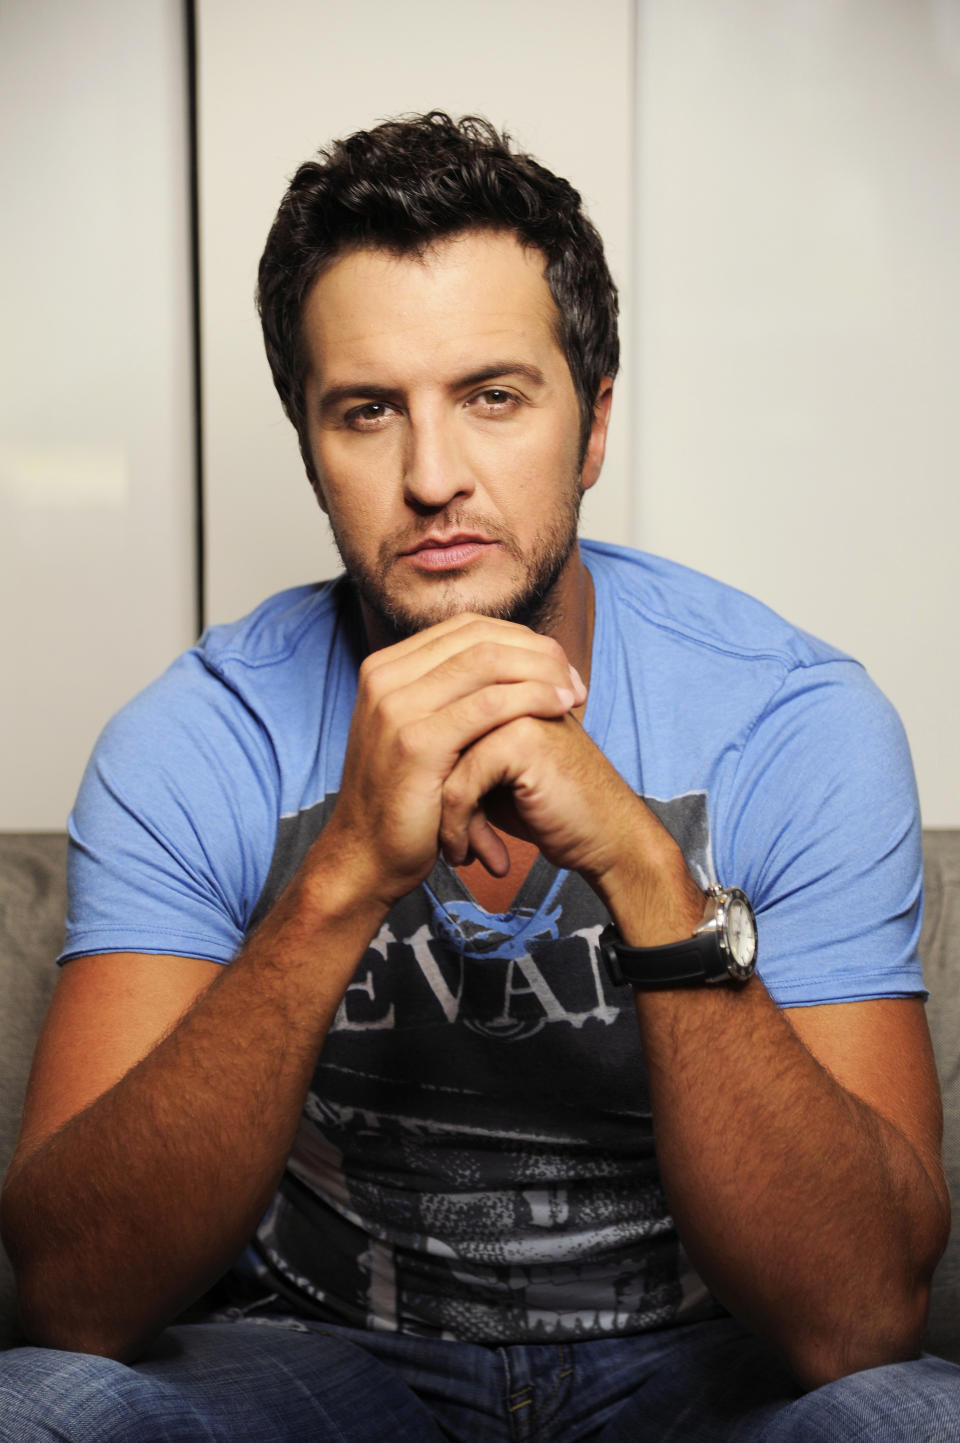 In this Tuesday, July 16, 2013 photo, Luke Bryan poses for a portrait at Audio Productions in Nashville, Tenn. Bryan has taken an unusual approach to the business side of his career since winning the Academy of Country Music's entertainer of the year in April: He's turning down almost everything. (Photo by Donn Jones/Invision/AP)